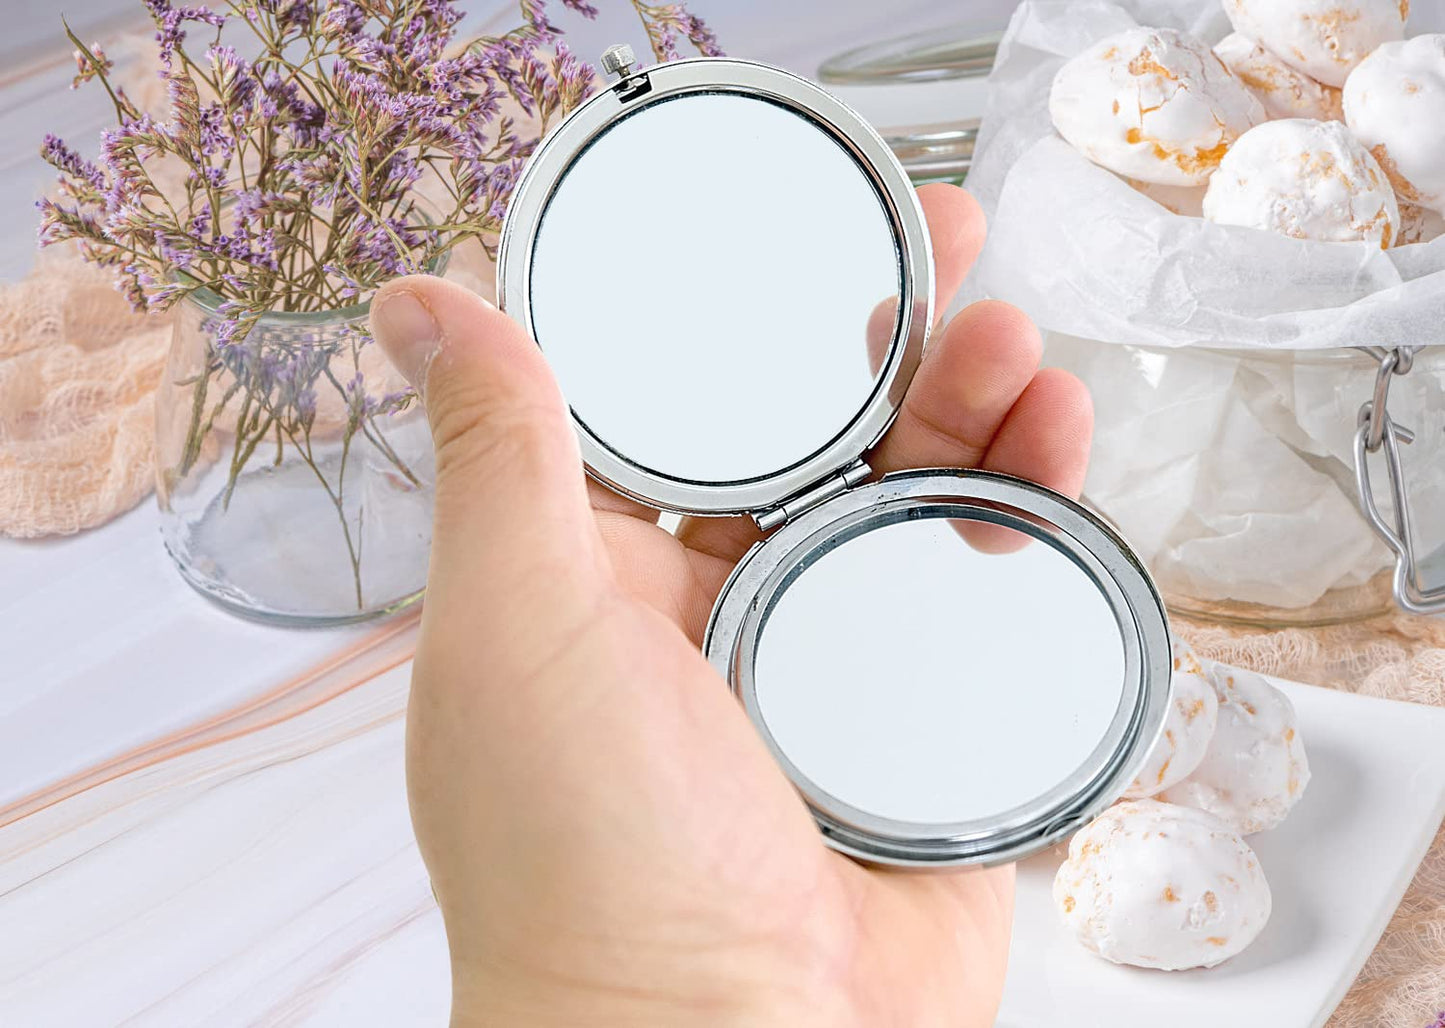 LRUIOMVE Sister Gift from Sister Brother, Inspirational Sliver Engraved Travel Makeup Mirror, Compact Pocket Cosmetic Mirror for Sister Girl Friends Birthday Christmas Graduation Gift